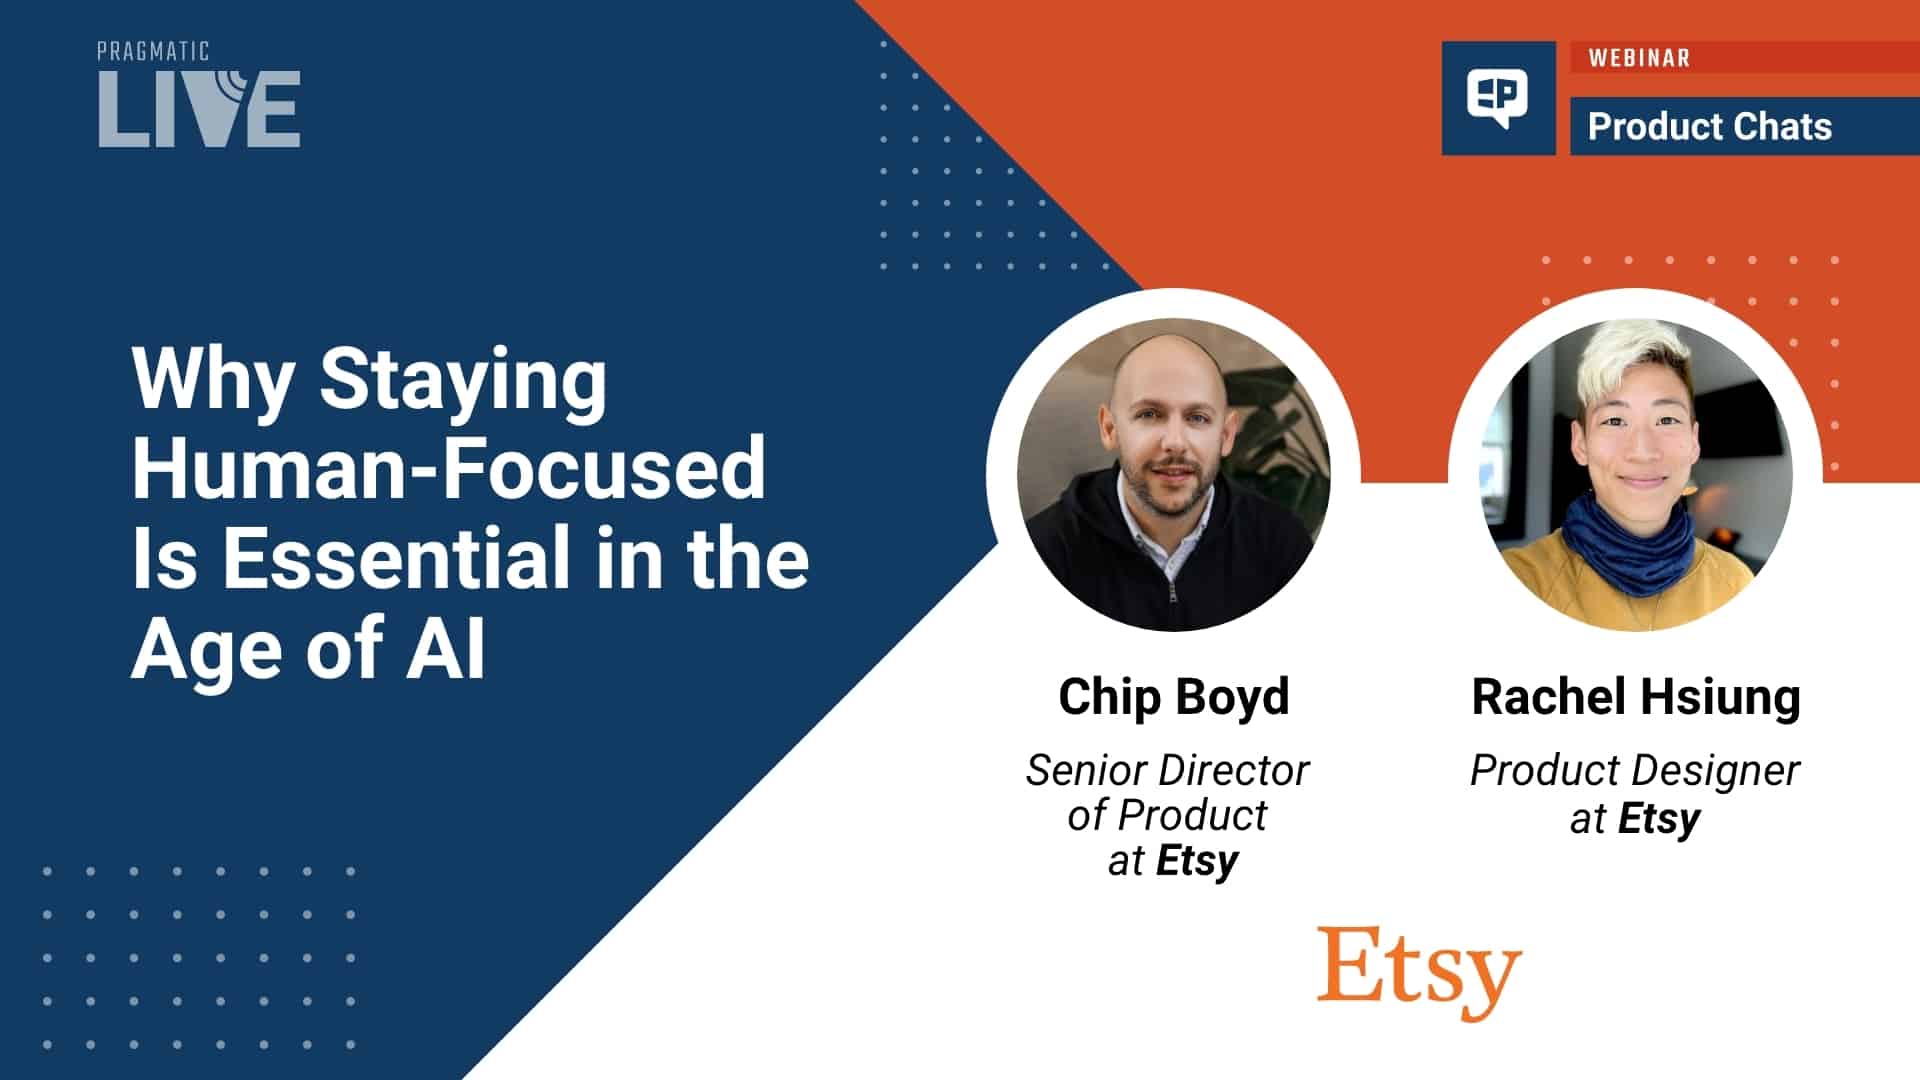 Age of AI webinar with Chip Boyd and Rachel Hsiung of Etsy